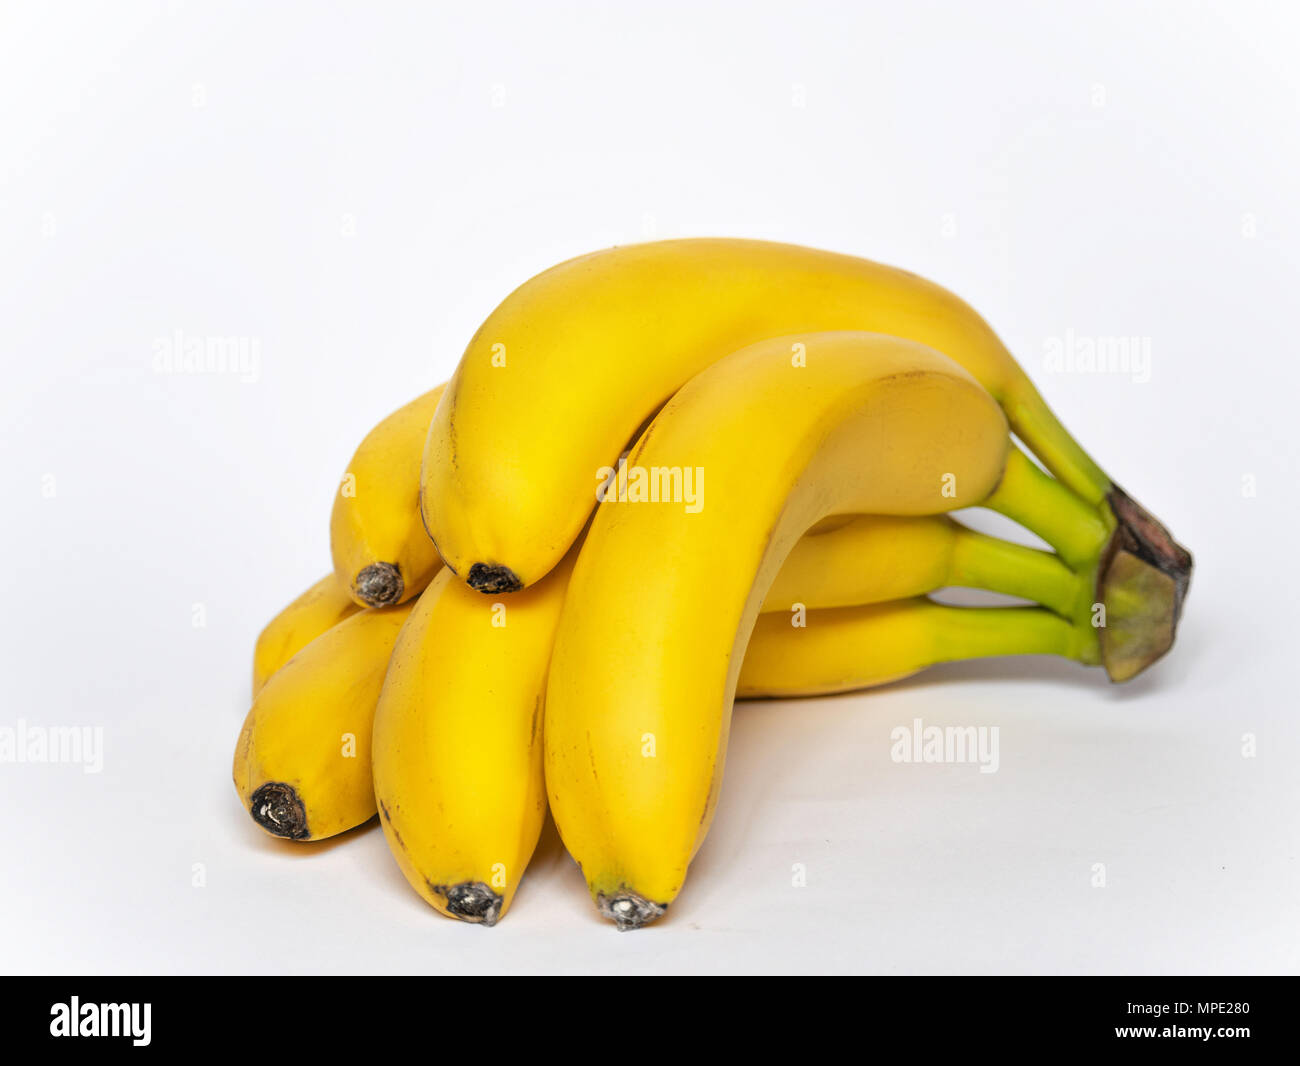 https://c8.alamy.com/comp/MPE280/bunch-of-bananas-isolated-on-white-background-flat-lay-top-view-closeup-MPE280.jpg